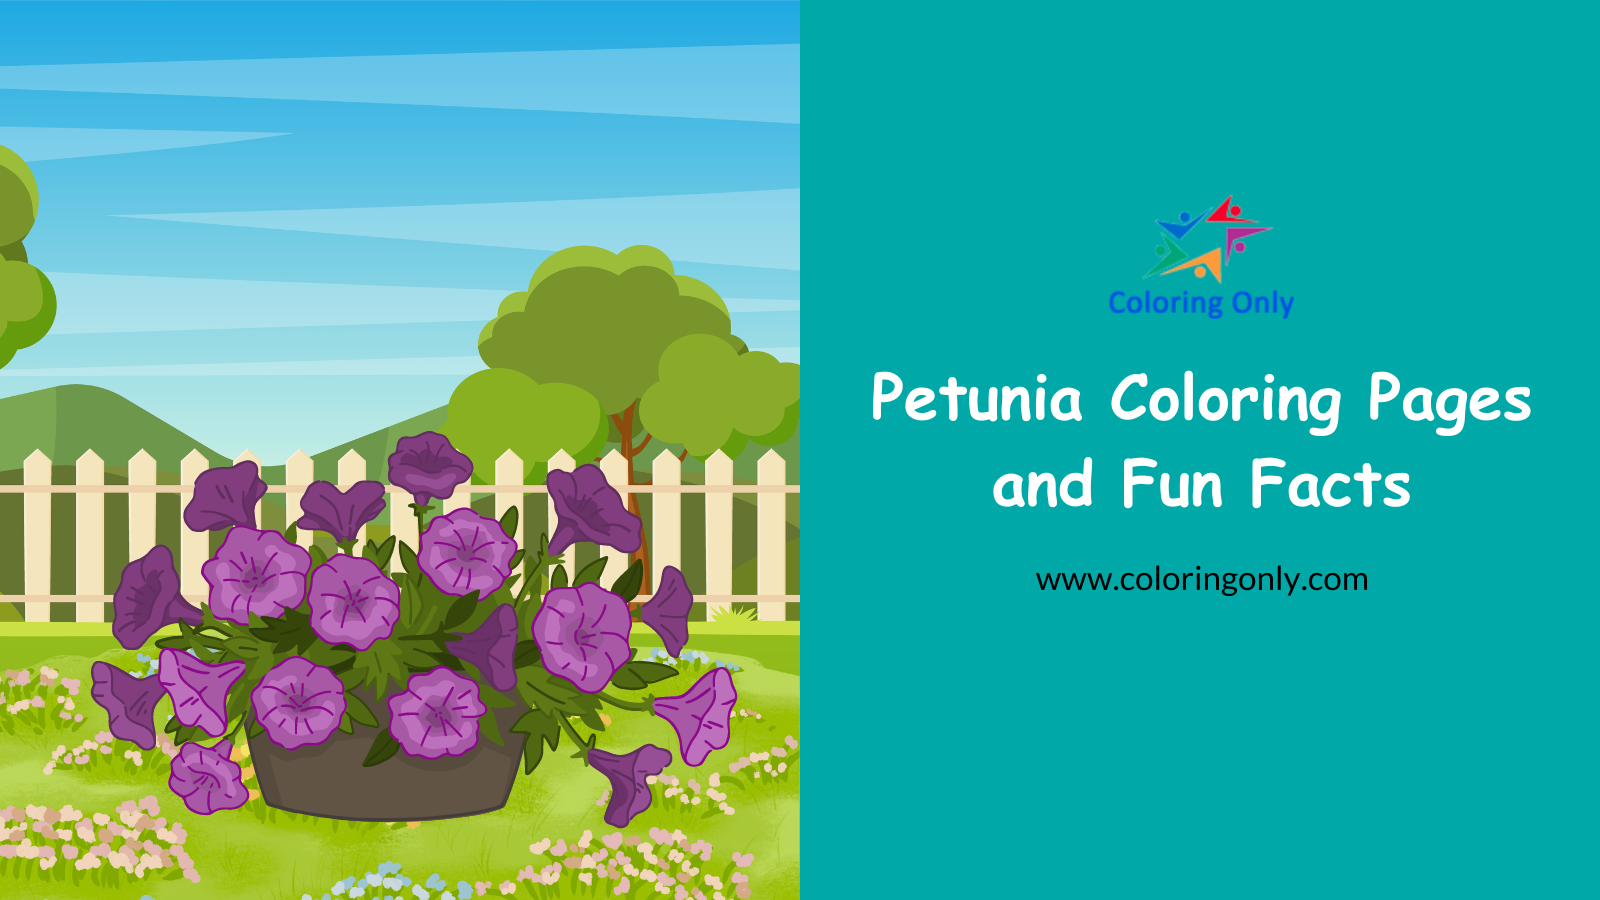 Petunia Coloring Pages and Fun Facts